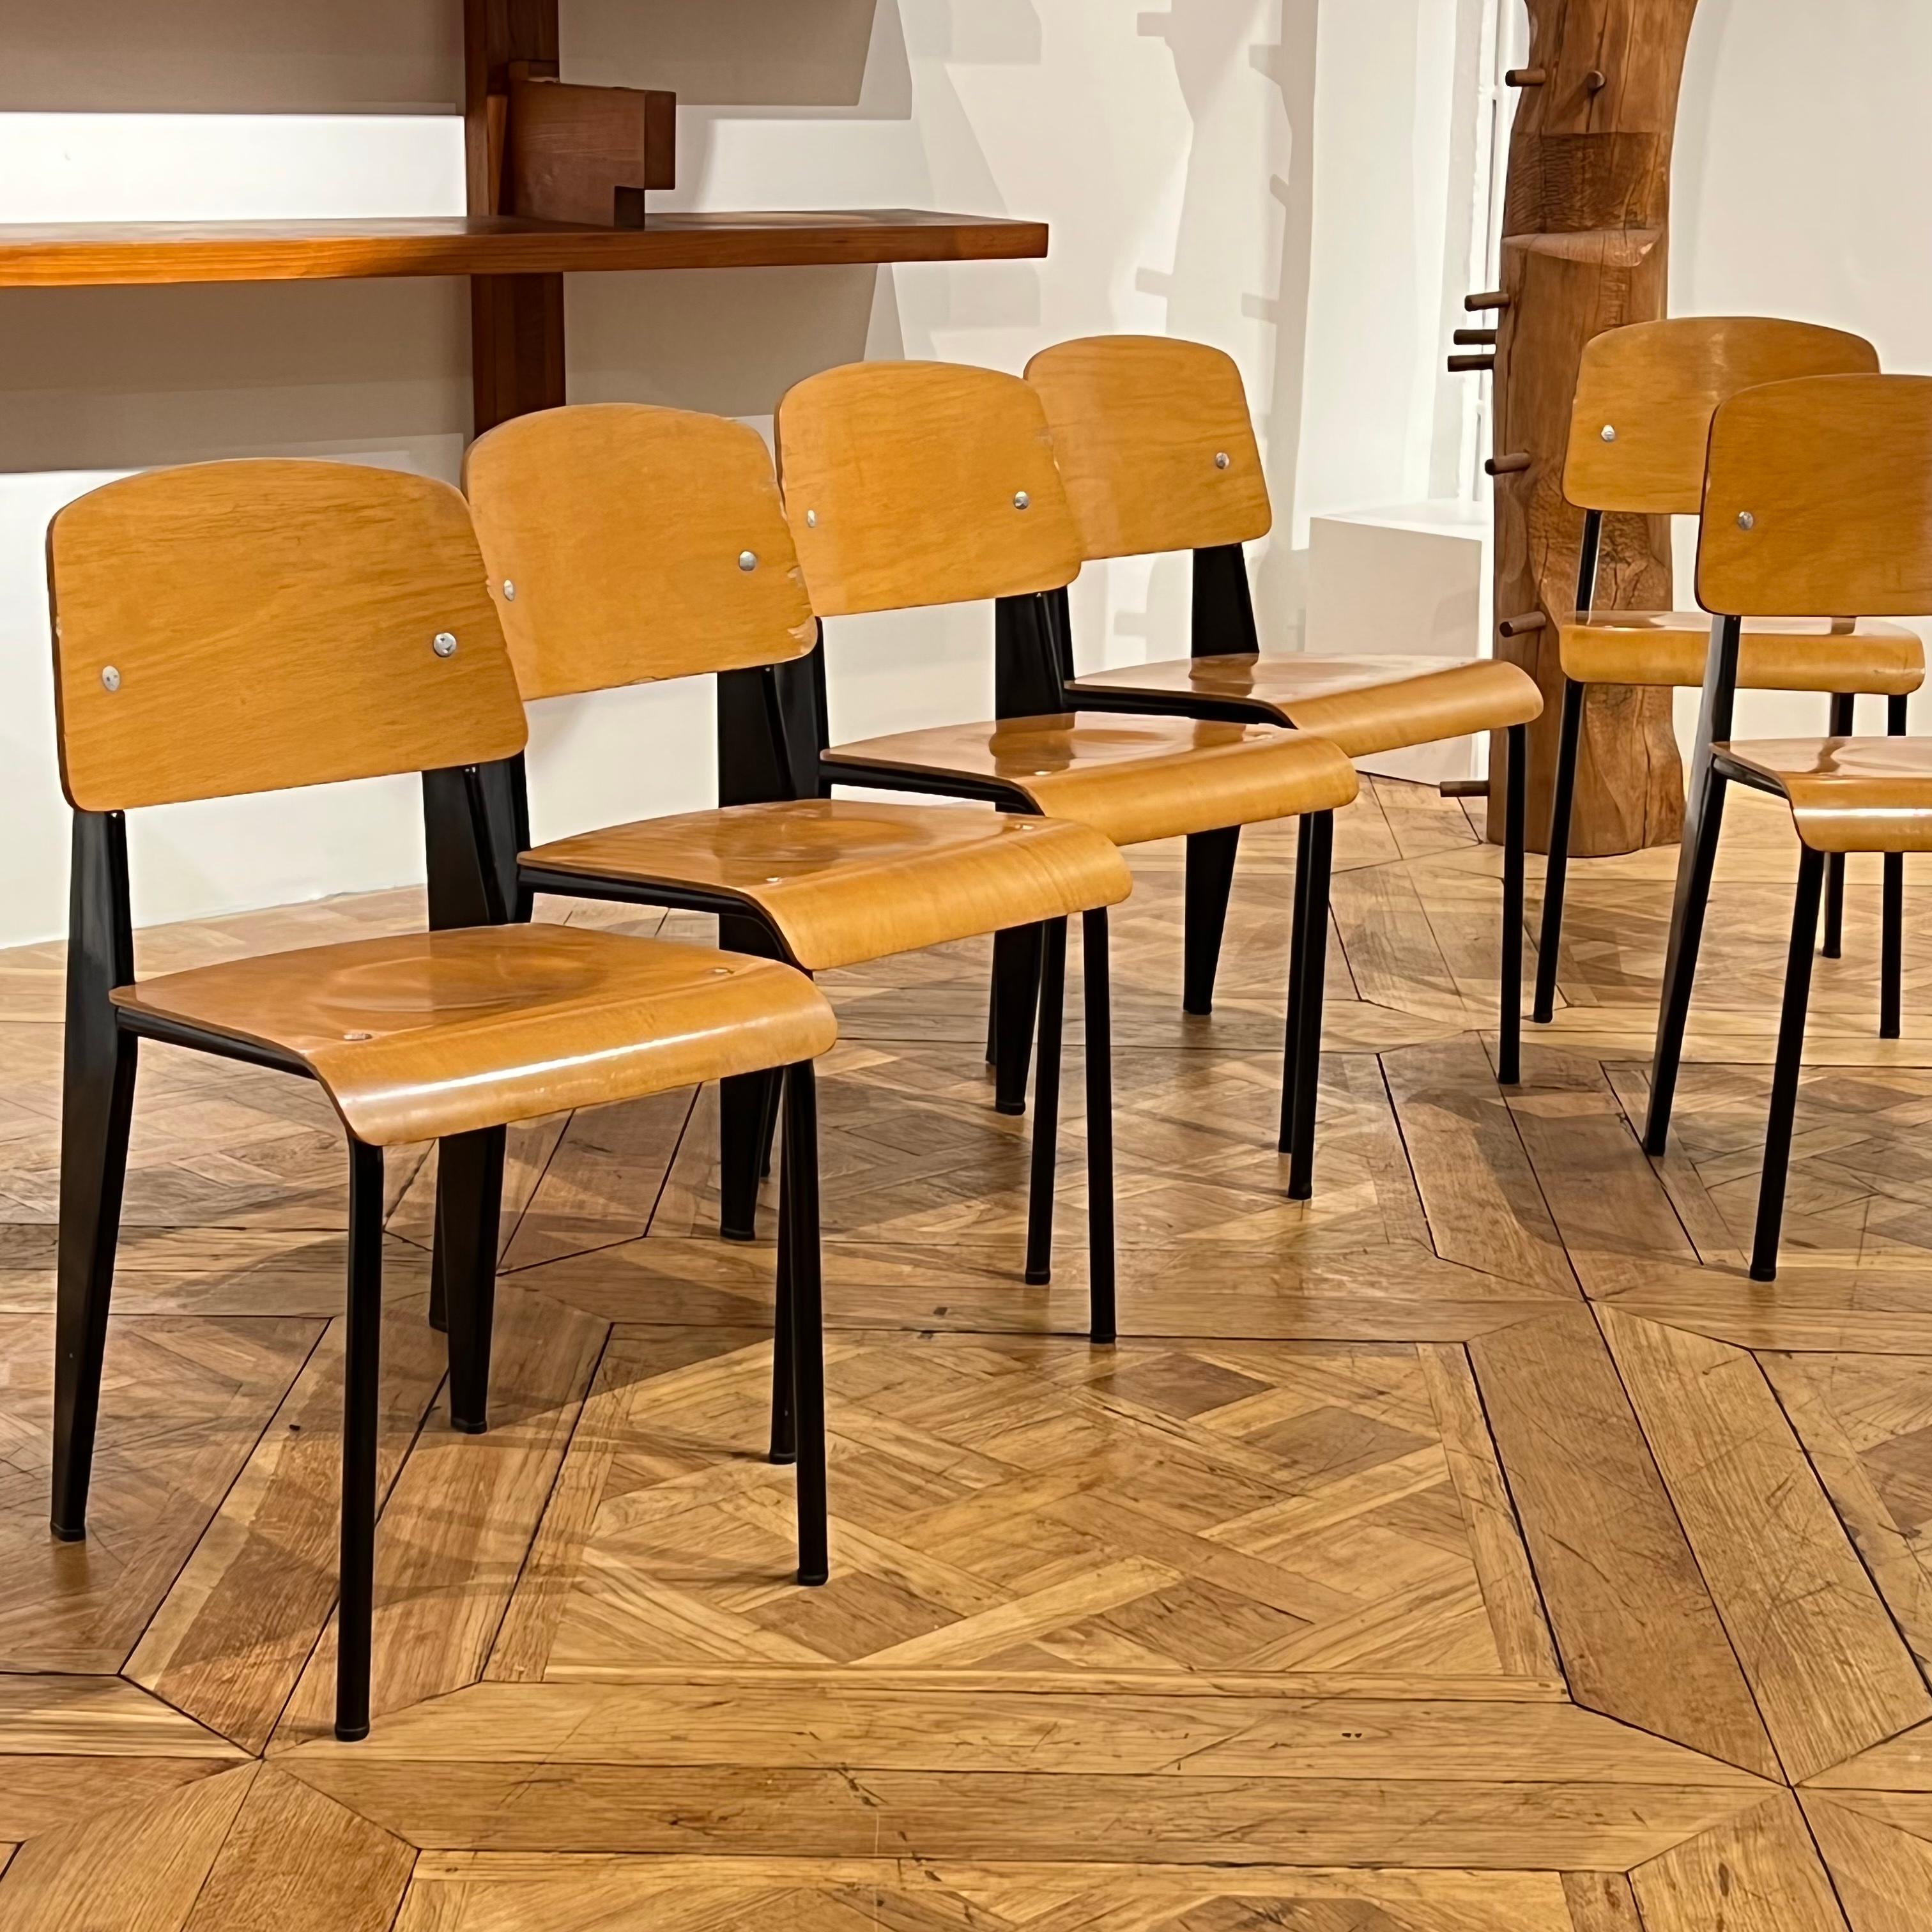 A very nice set of 6 standard chairs by Jean Prouvé.

Very nice condition, 
coming from the collection of Peter Lindbergh apartment in Paris. 

1950s original pieces.

